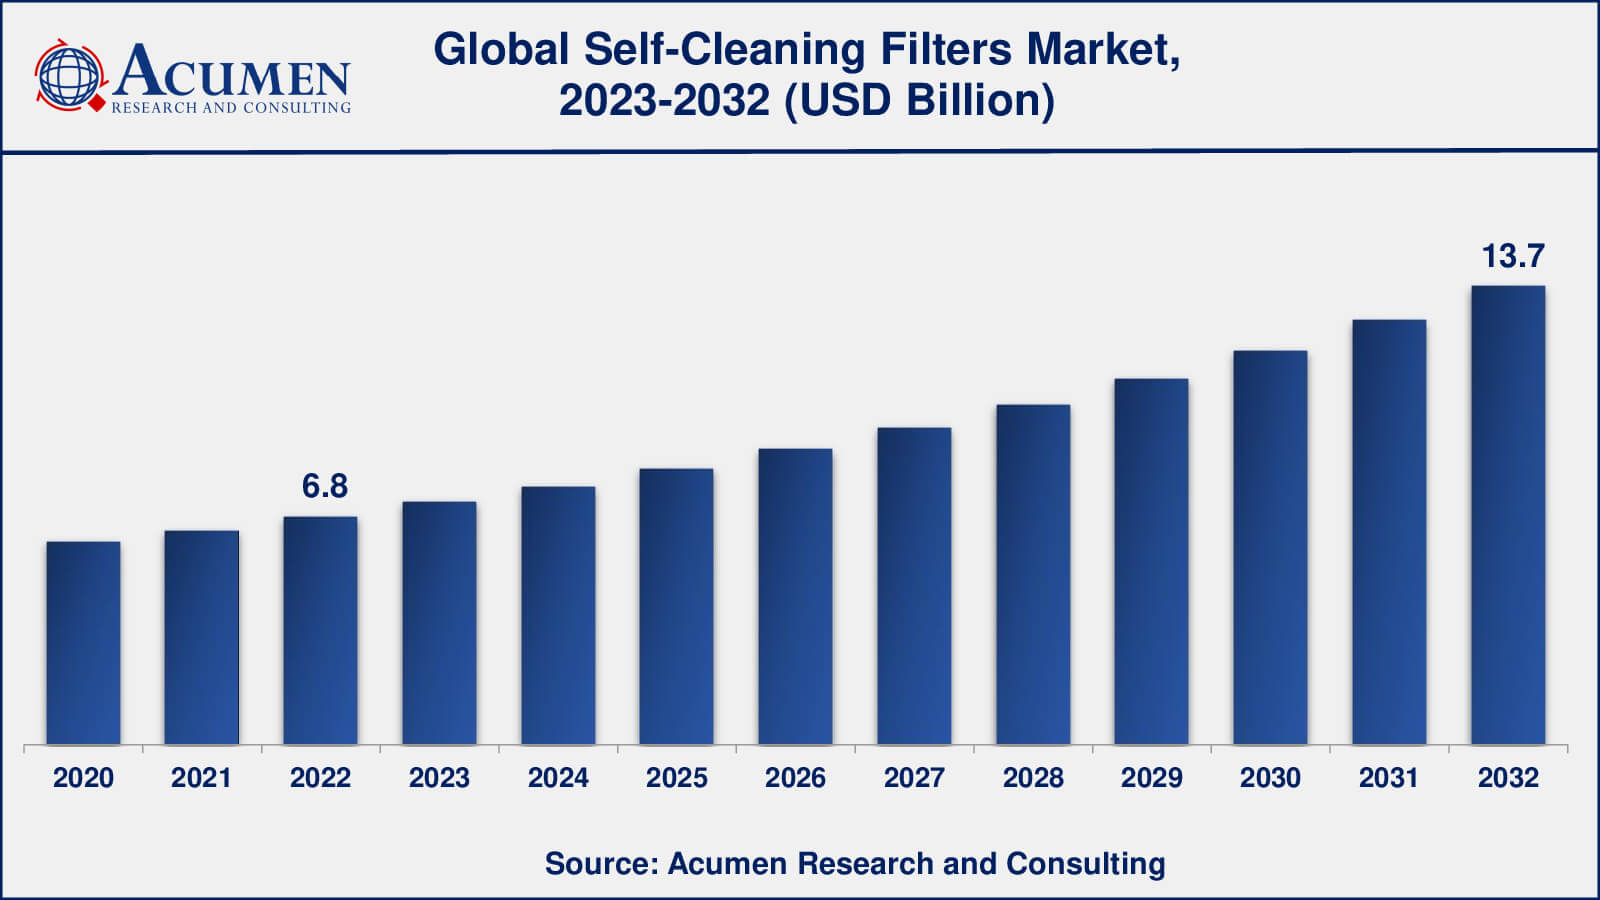 Self-Cleaning Filters Market Analysis Period